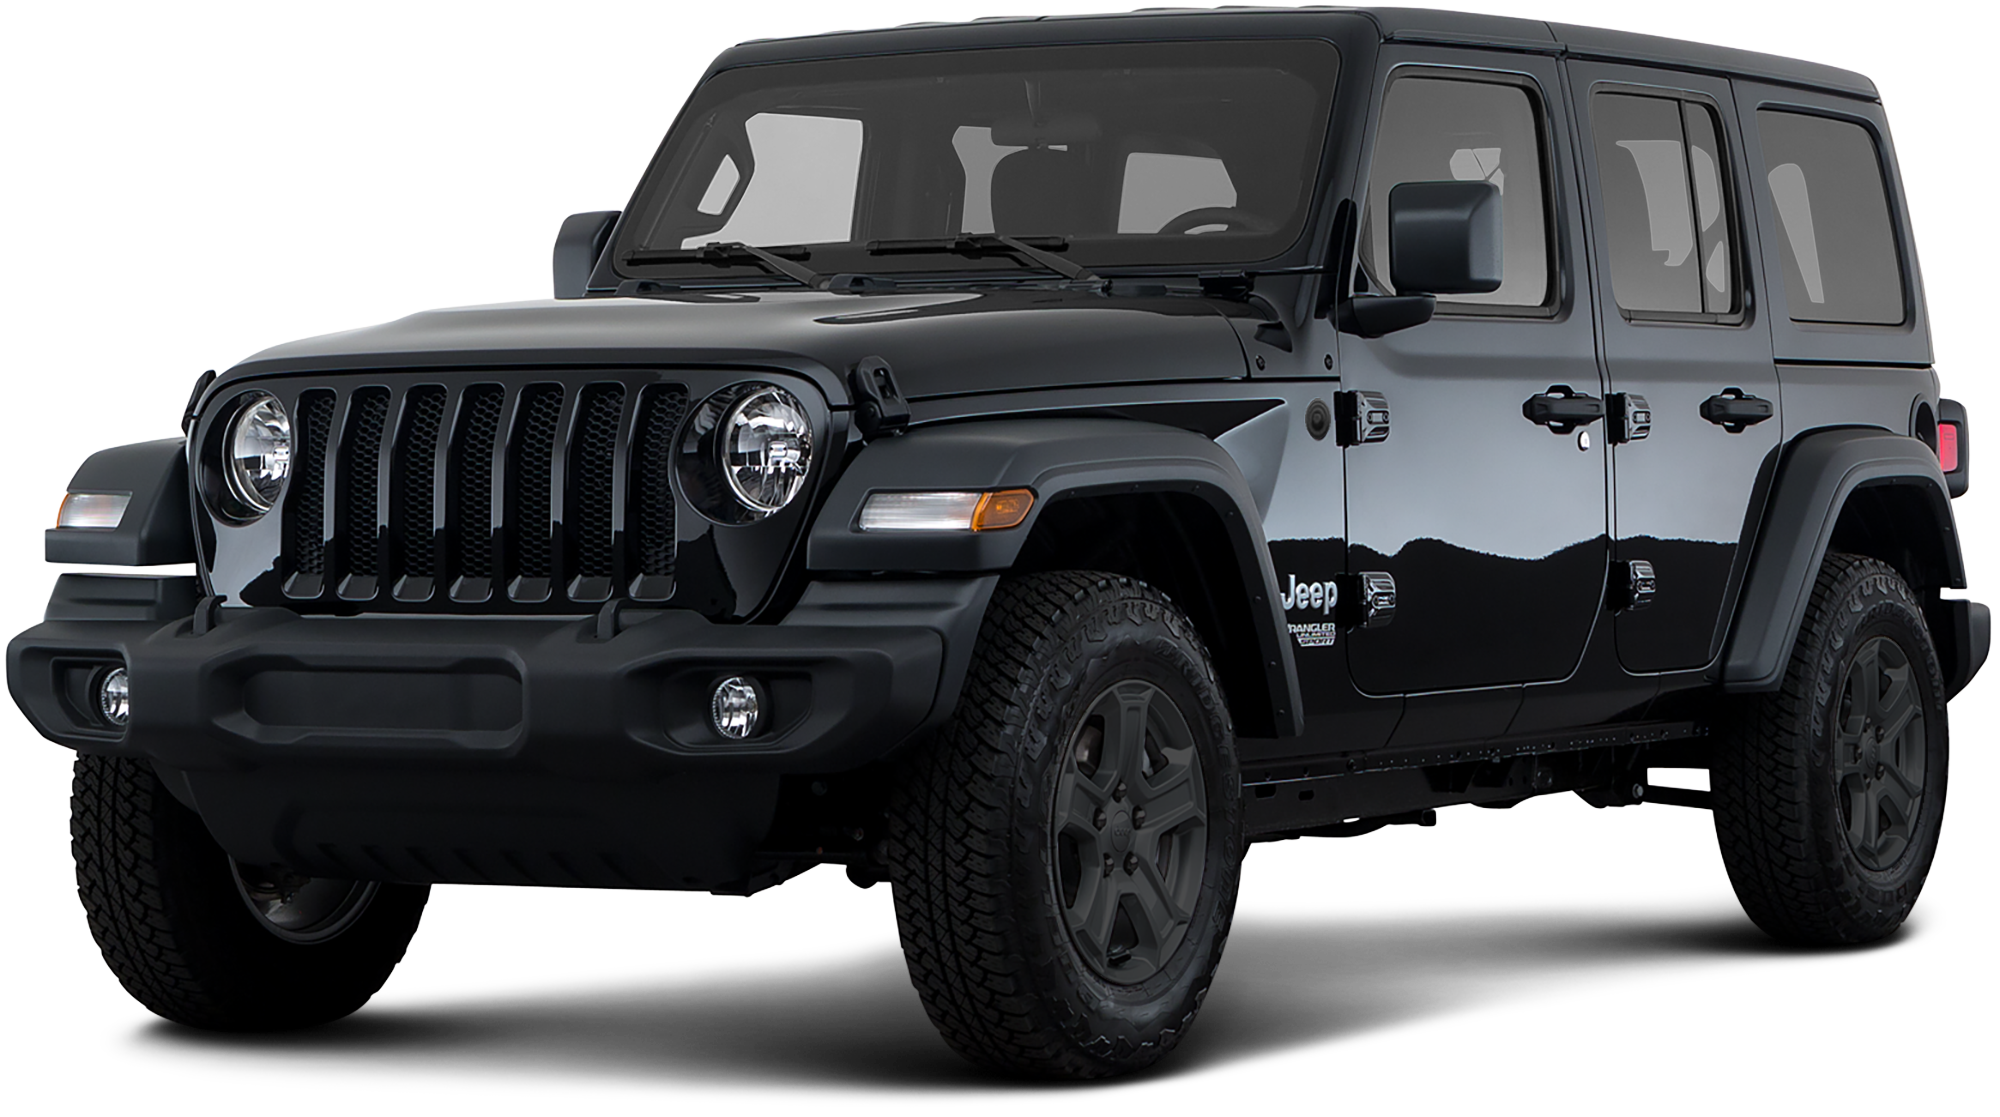 2021 Jeep Wrangler Incentives, Specials & Offers in Fort Myers FL